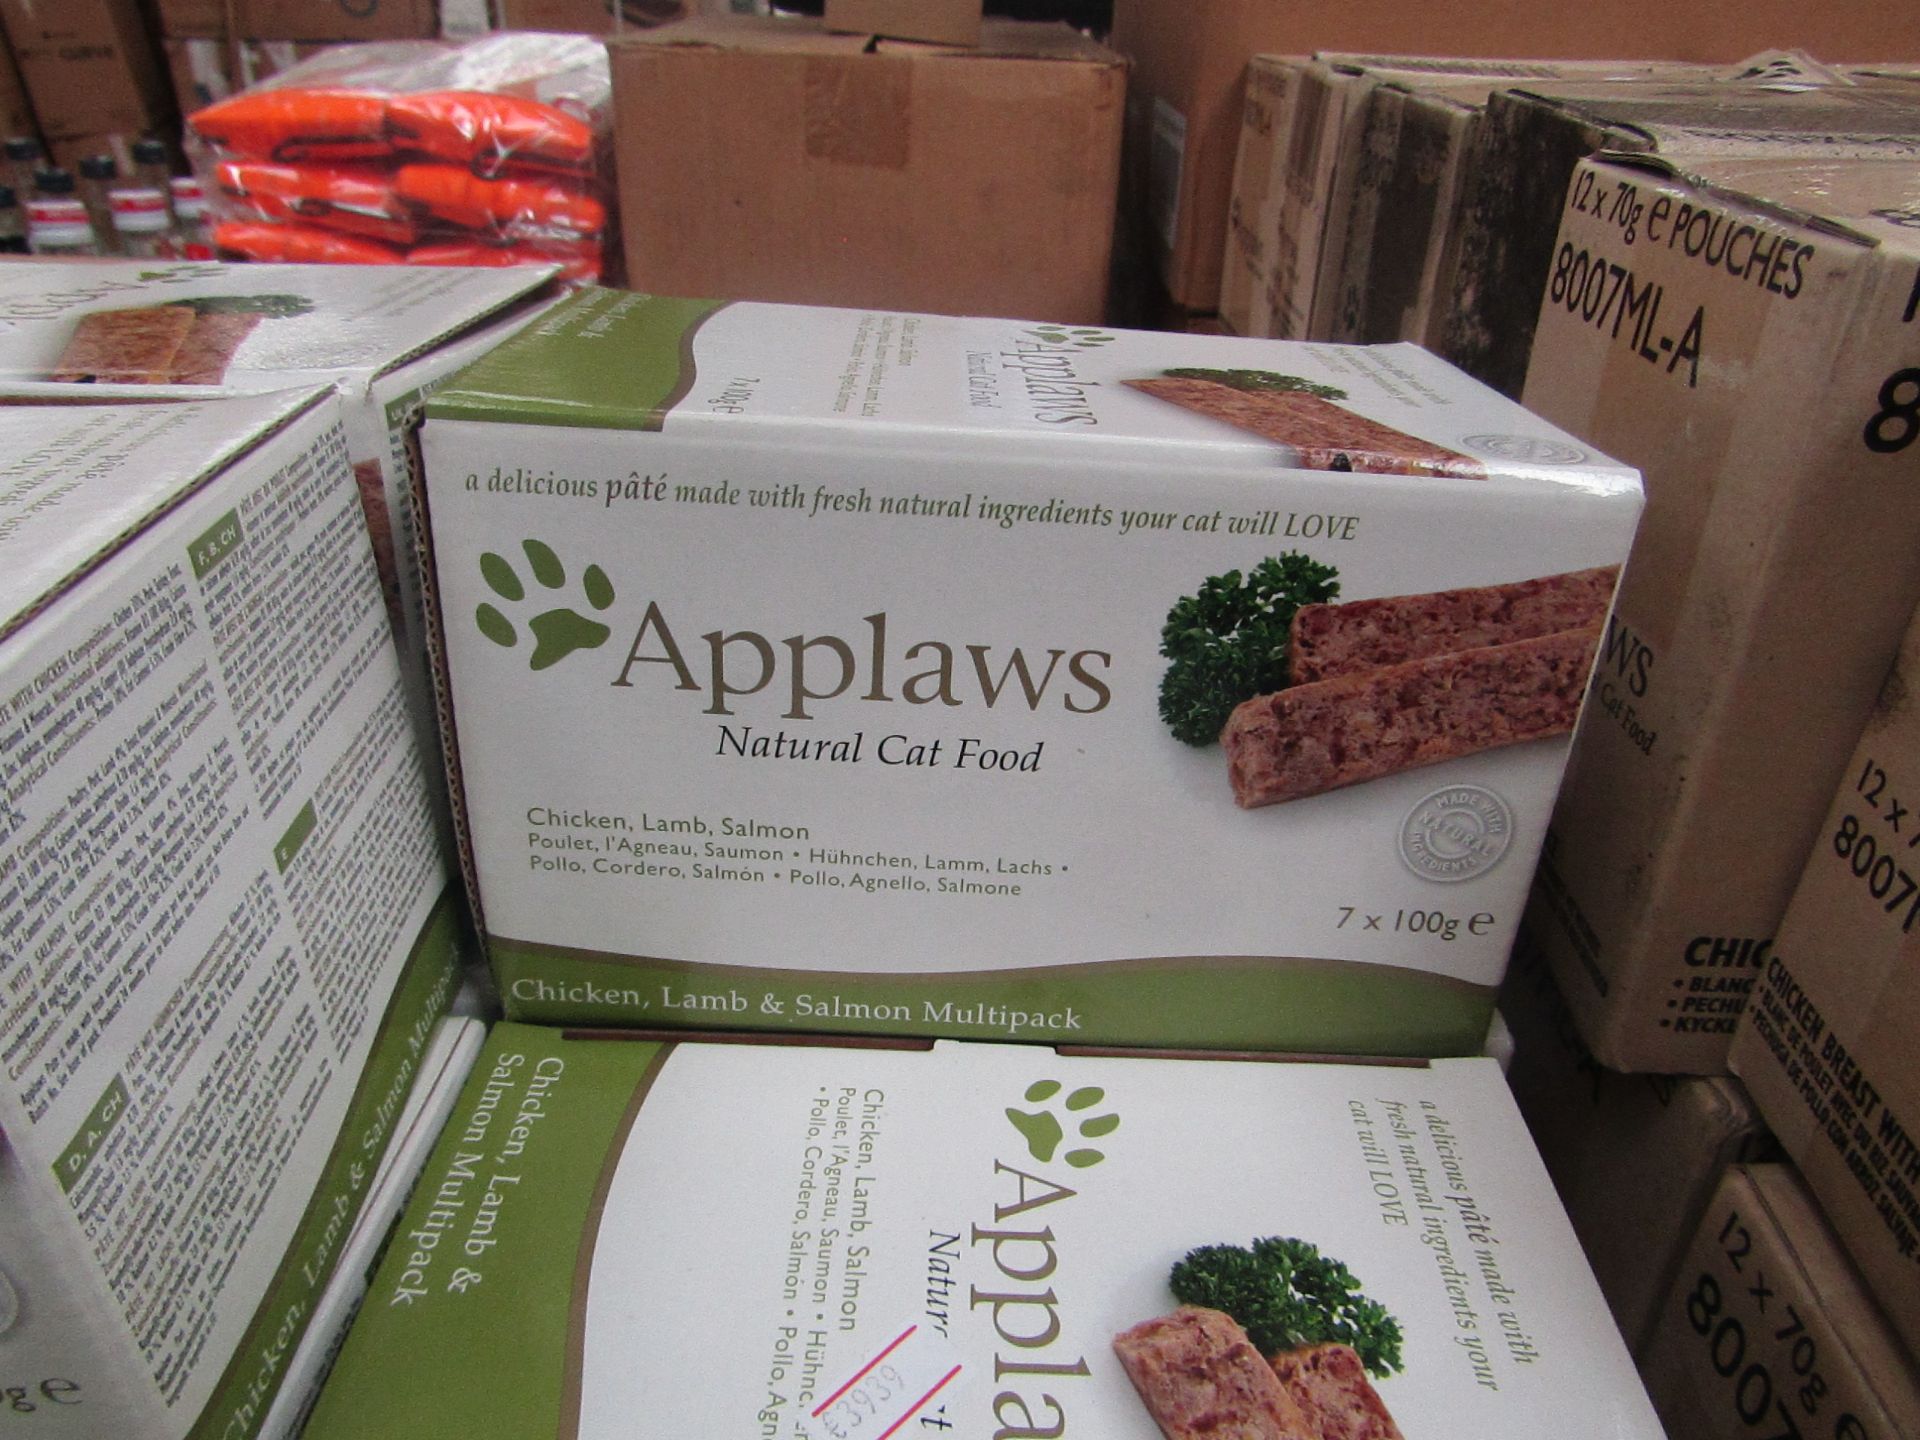 Applaws - Chicken, Lamb & Salmon Multi-pack Natural Cat Food (7x 100g Pouches) - BBD 2022.